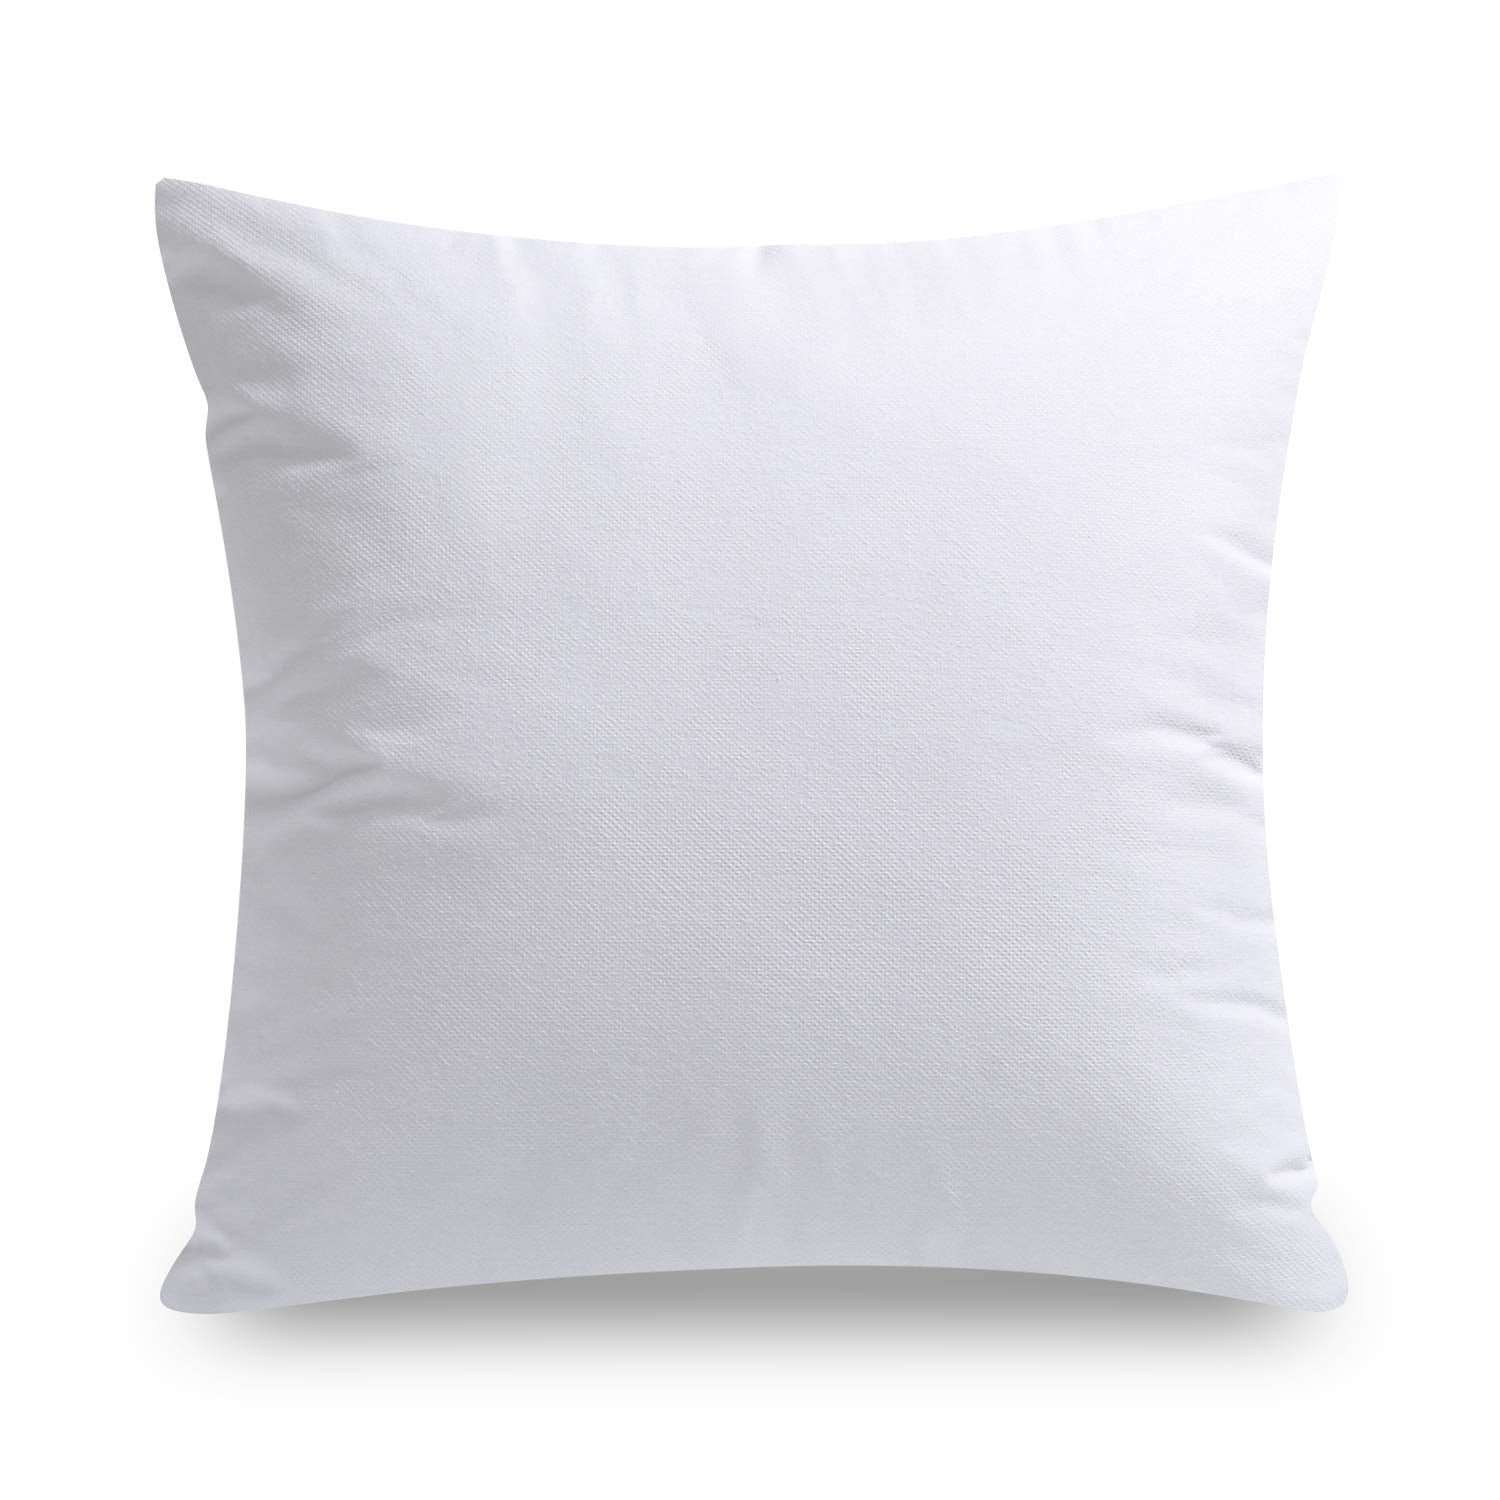 Phantoscope Pillow Inserts, Hypoallergenic 100% Virgin Fiber Square Form  Microfiber Throw Pillow Inserts, Couch Bed Pillows 45x45 cm, 18x18 Inch  (Pack